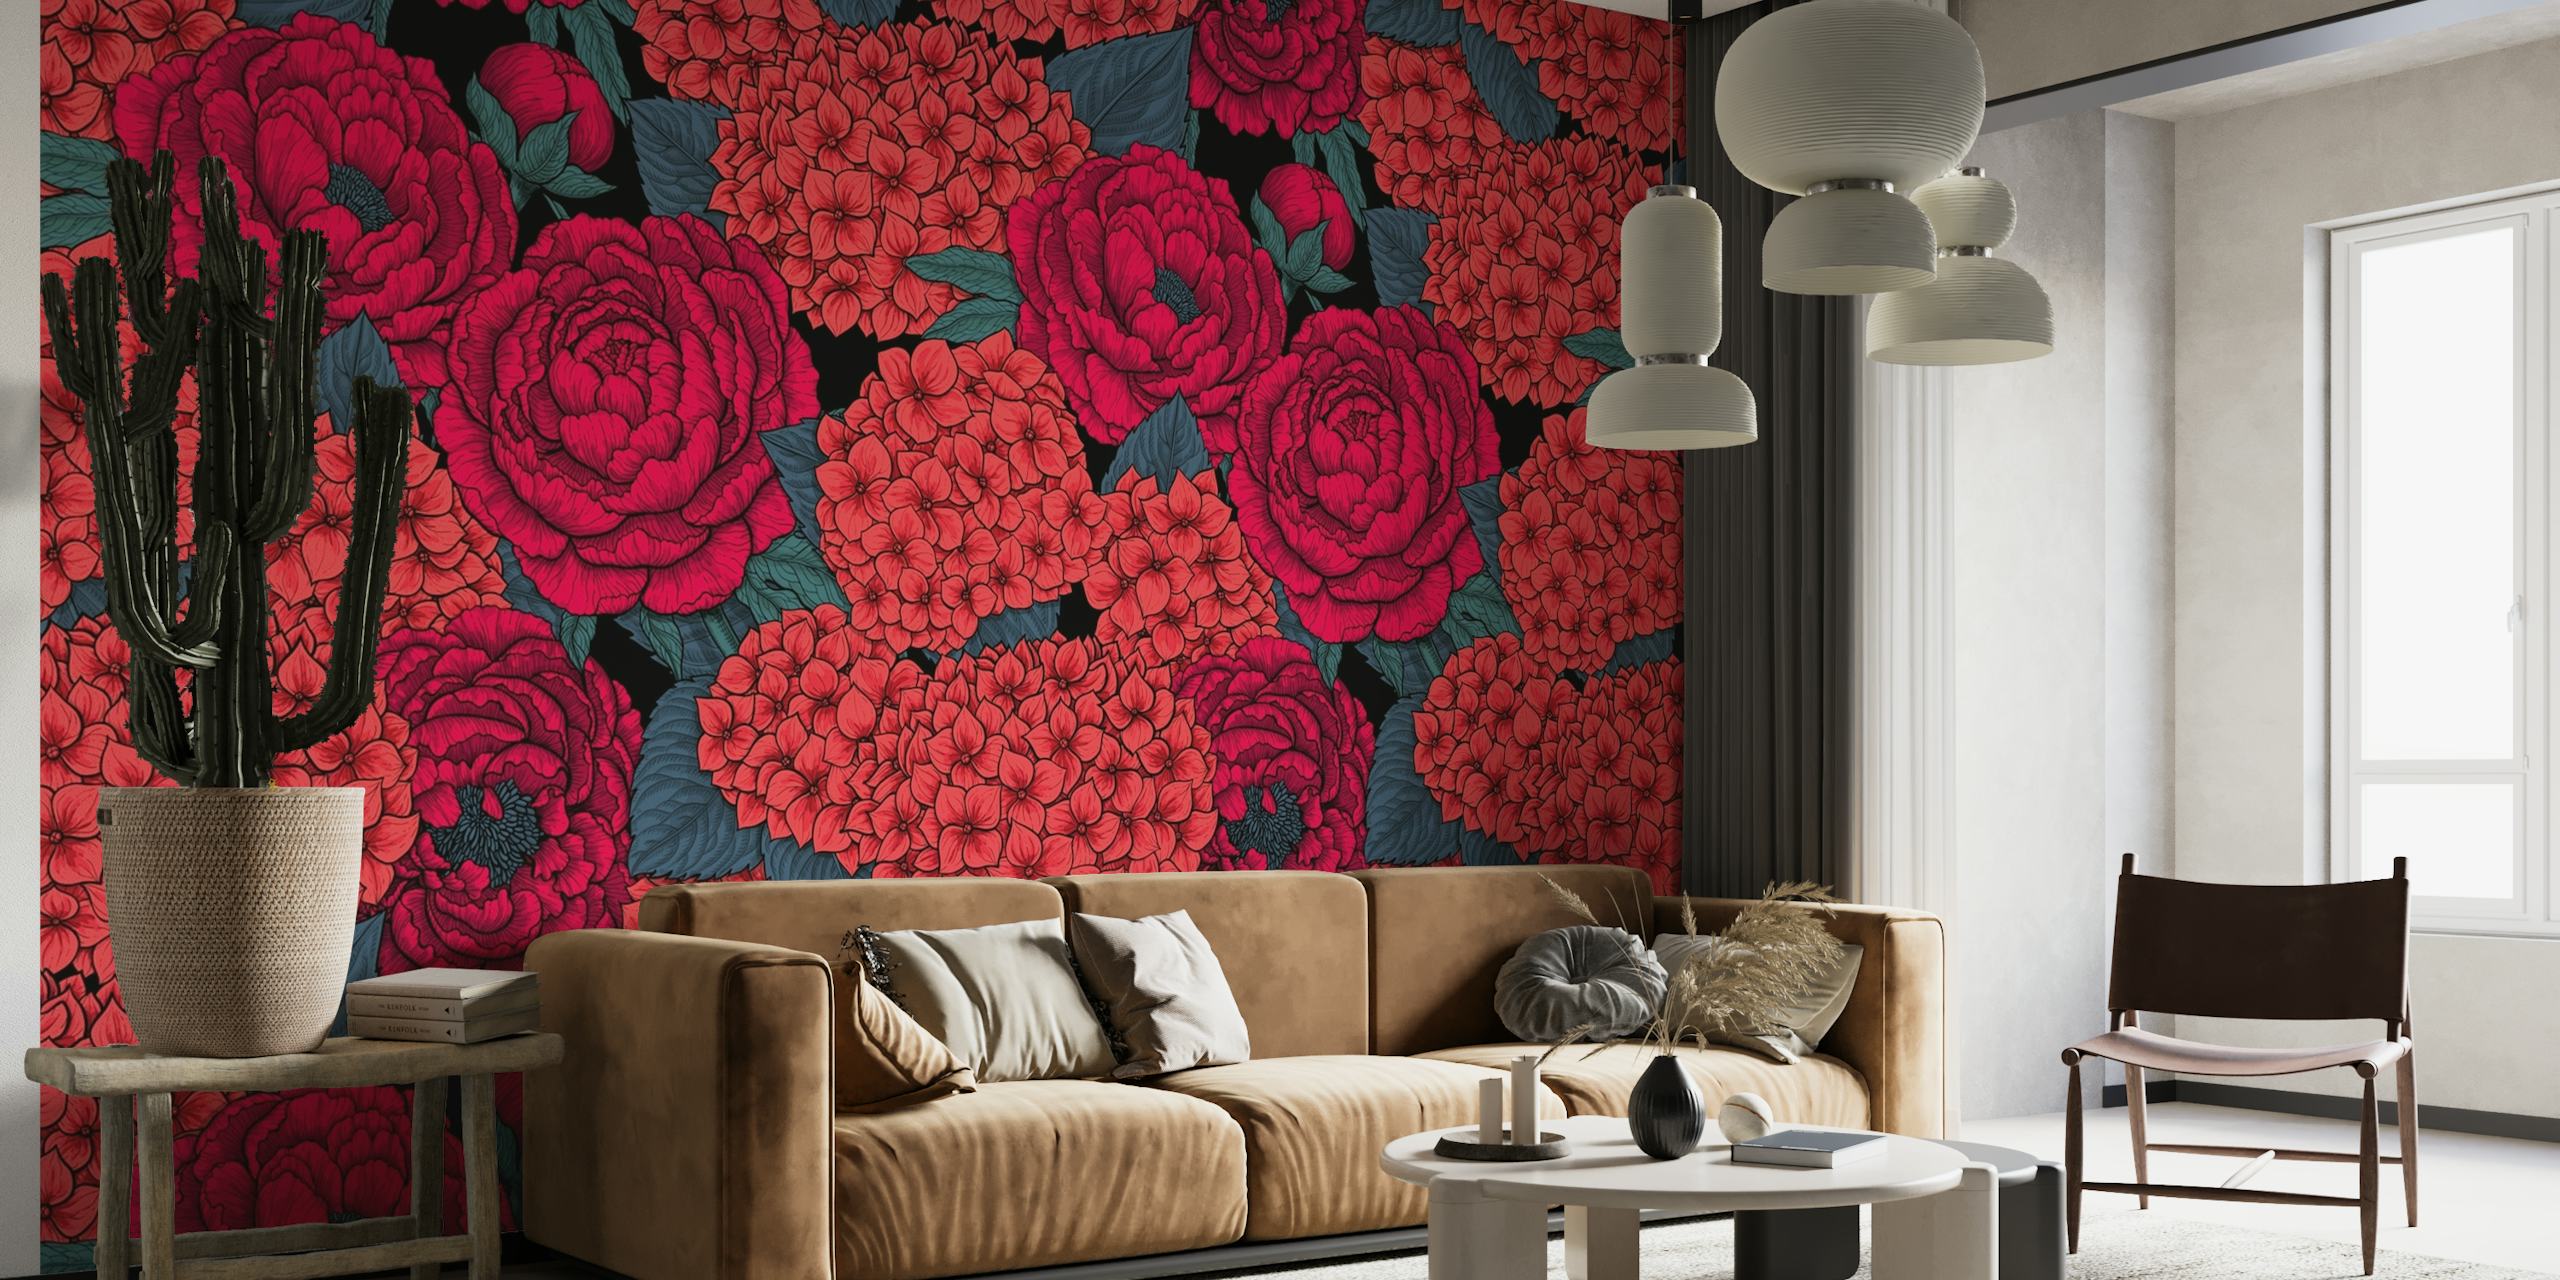 Vibrant peony and hydrangea wall mural in shades of red